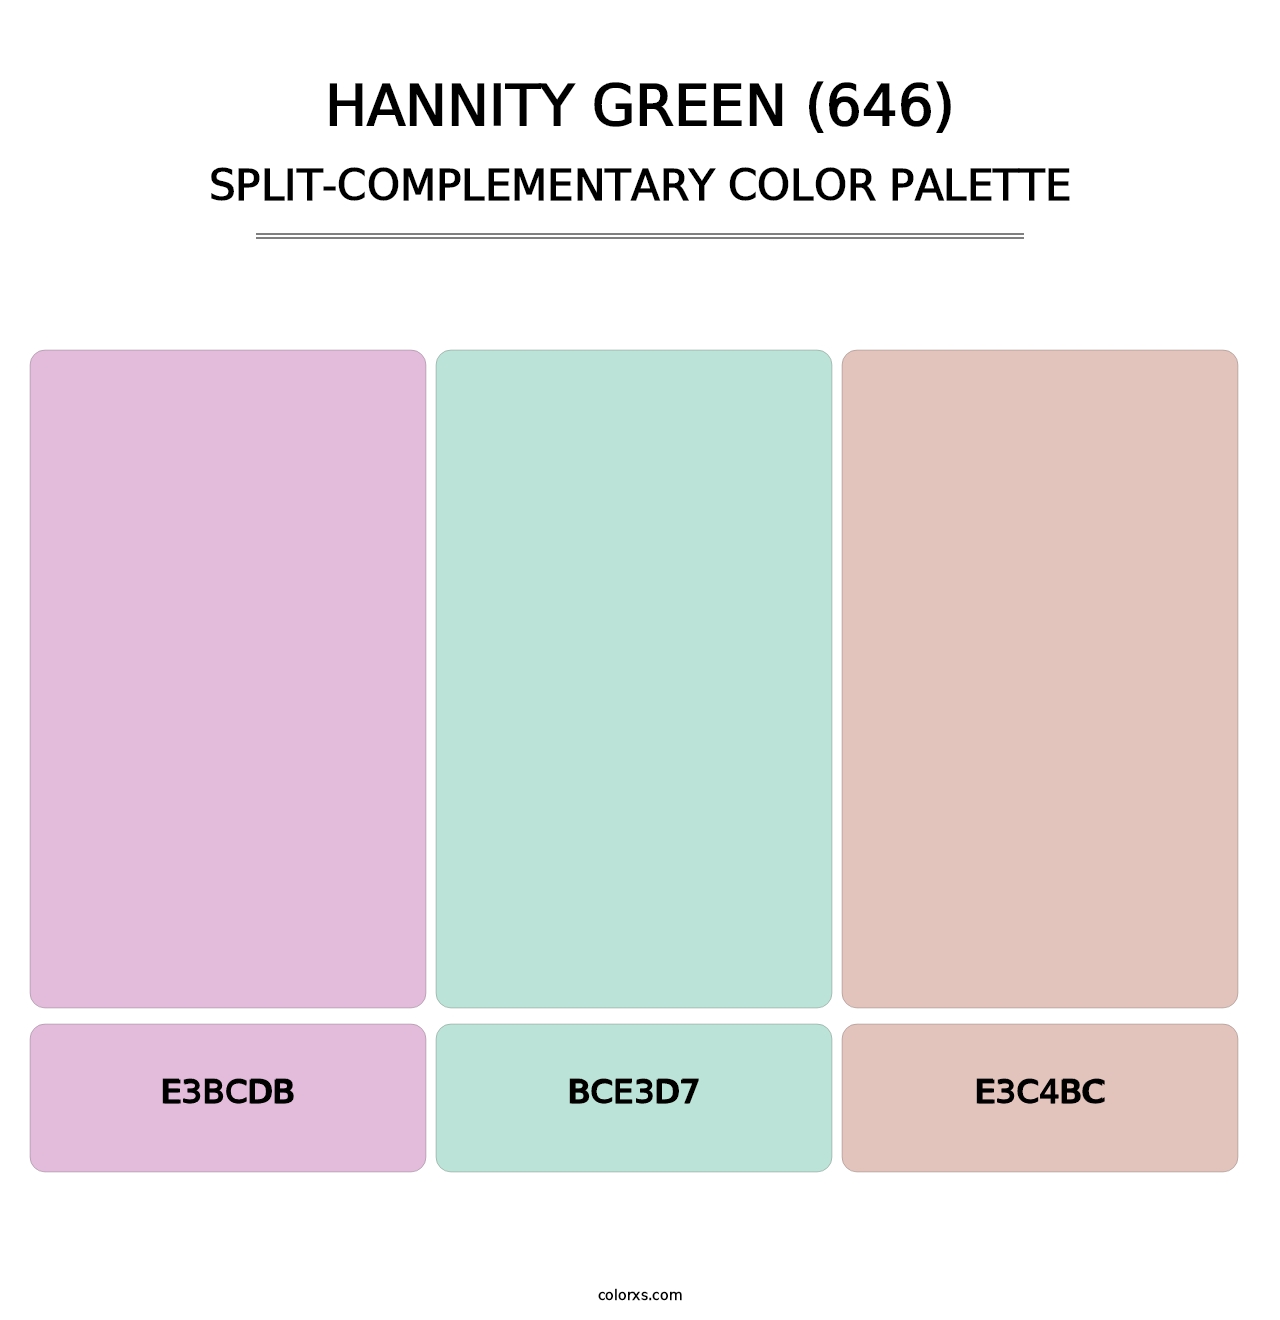 Hannity Green (646) - Split-Complementary Color Palette